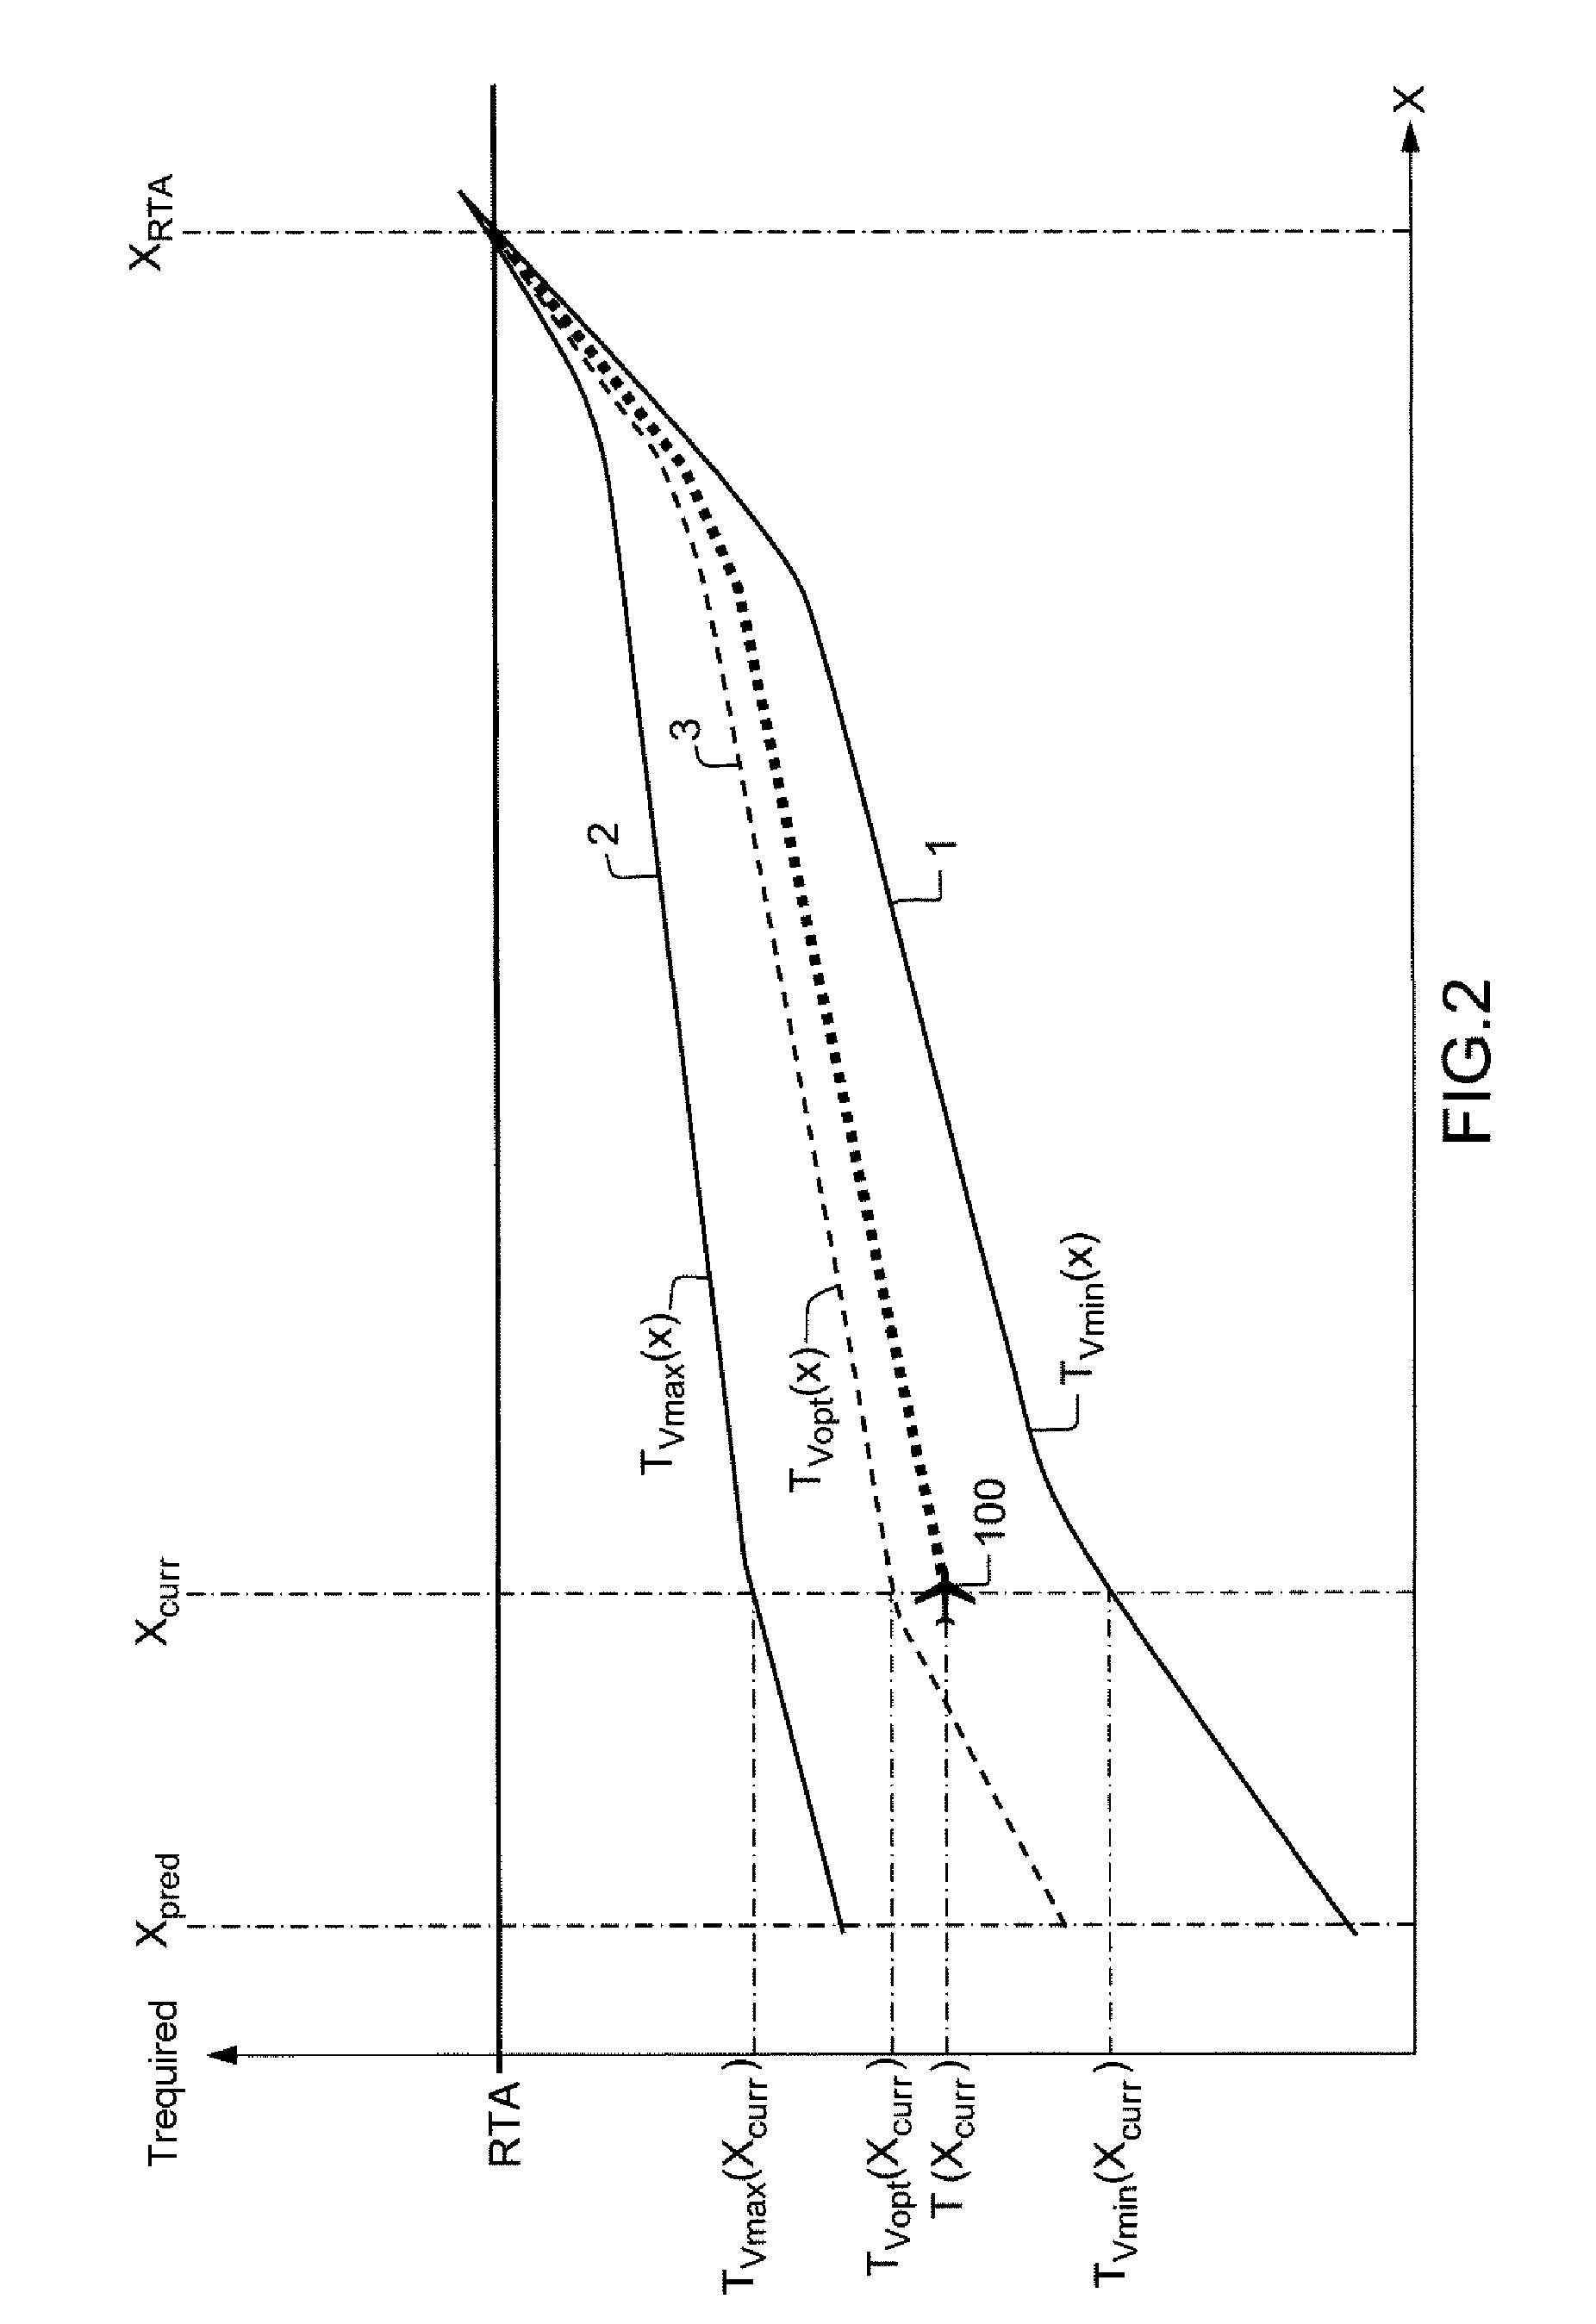 Method for continuously and adaptively generating a speed setpoint for an aircraft to observe an RTA